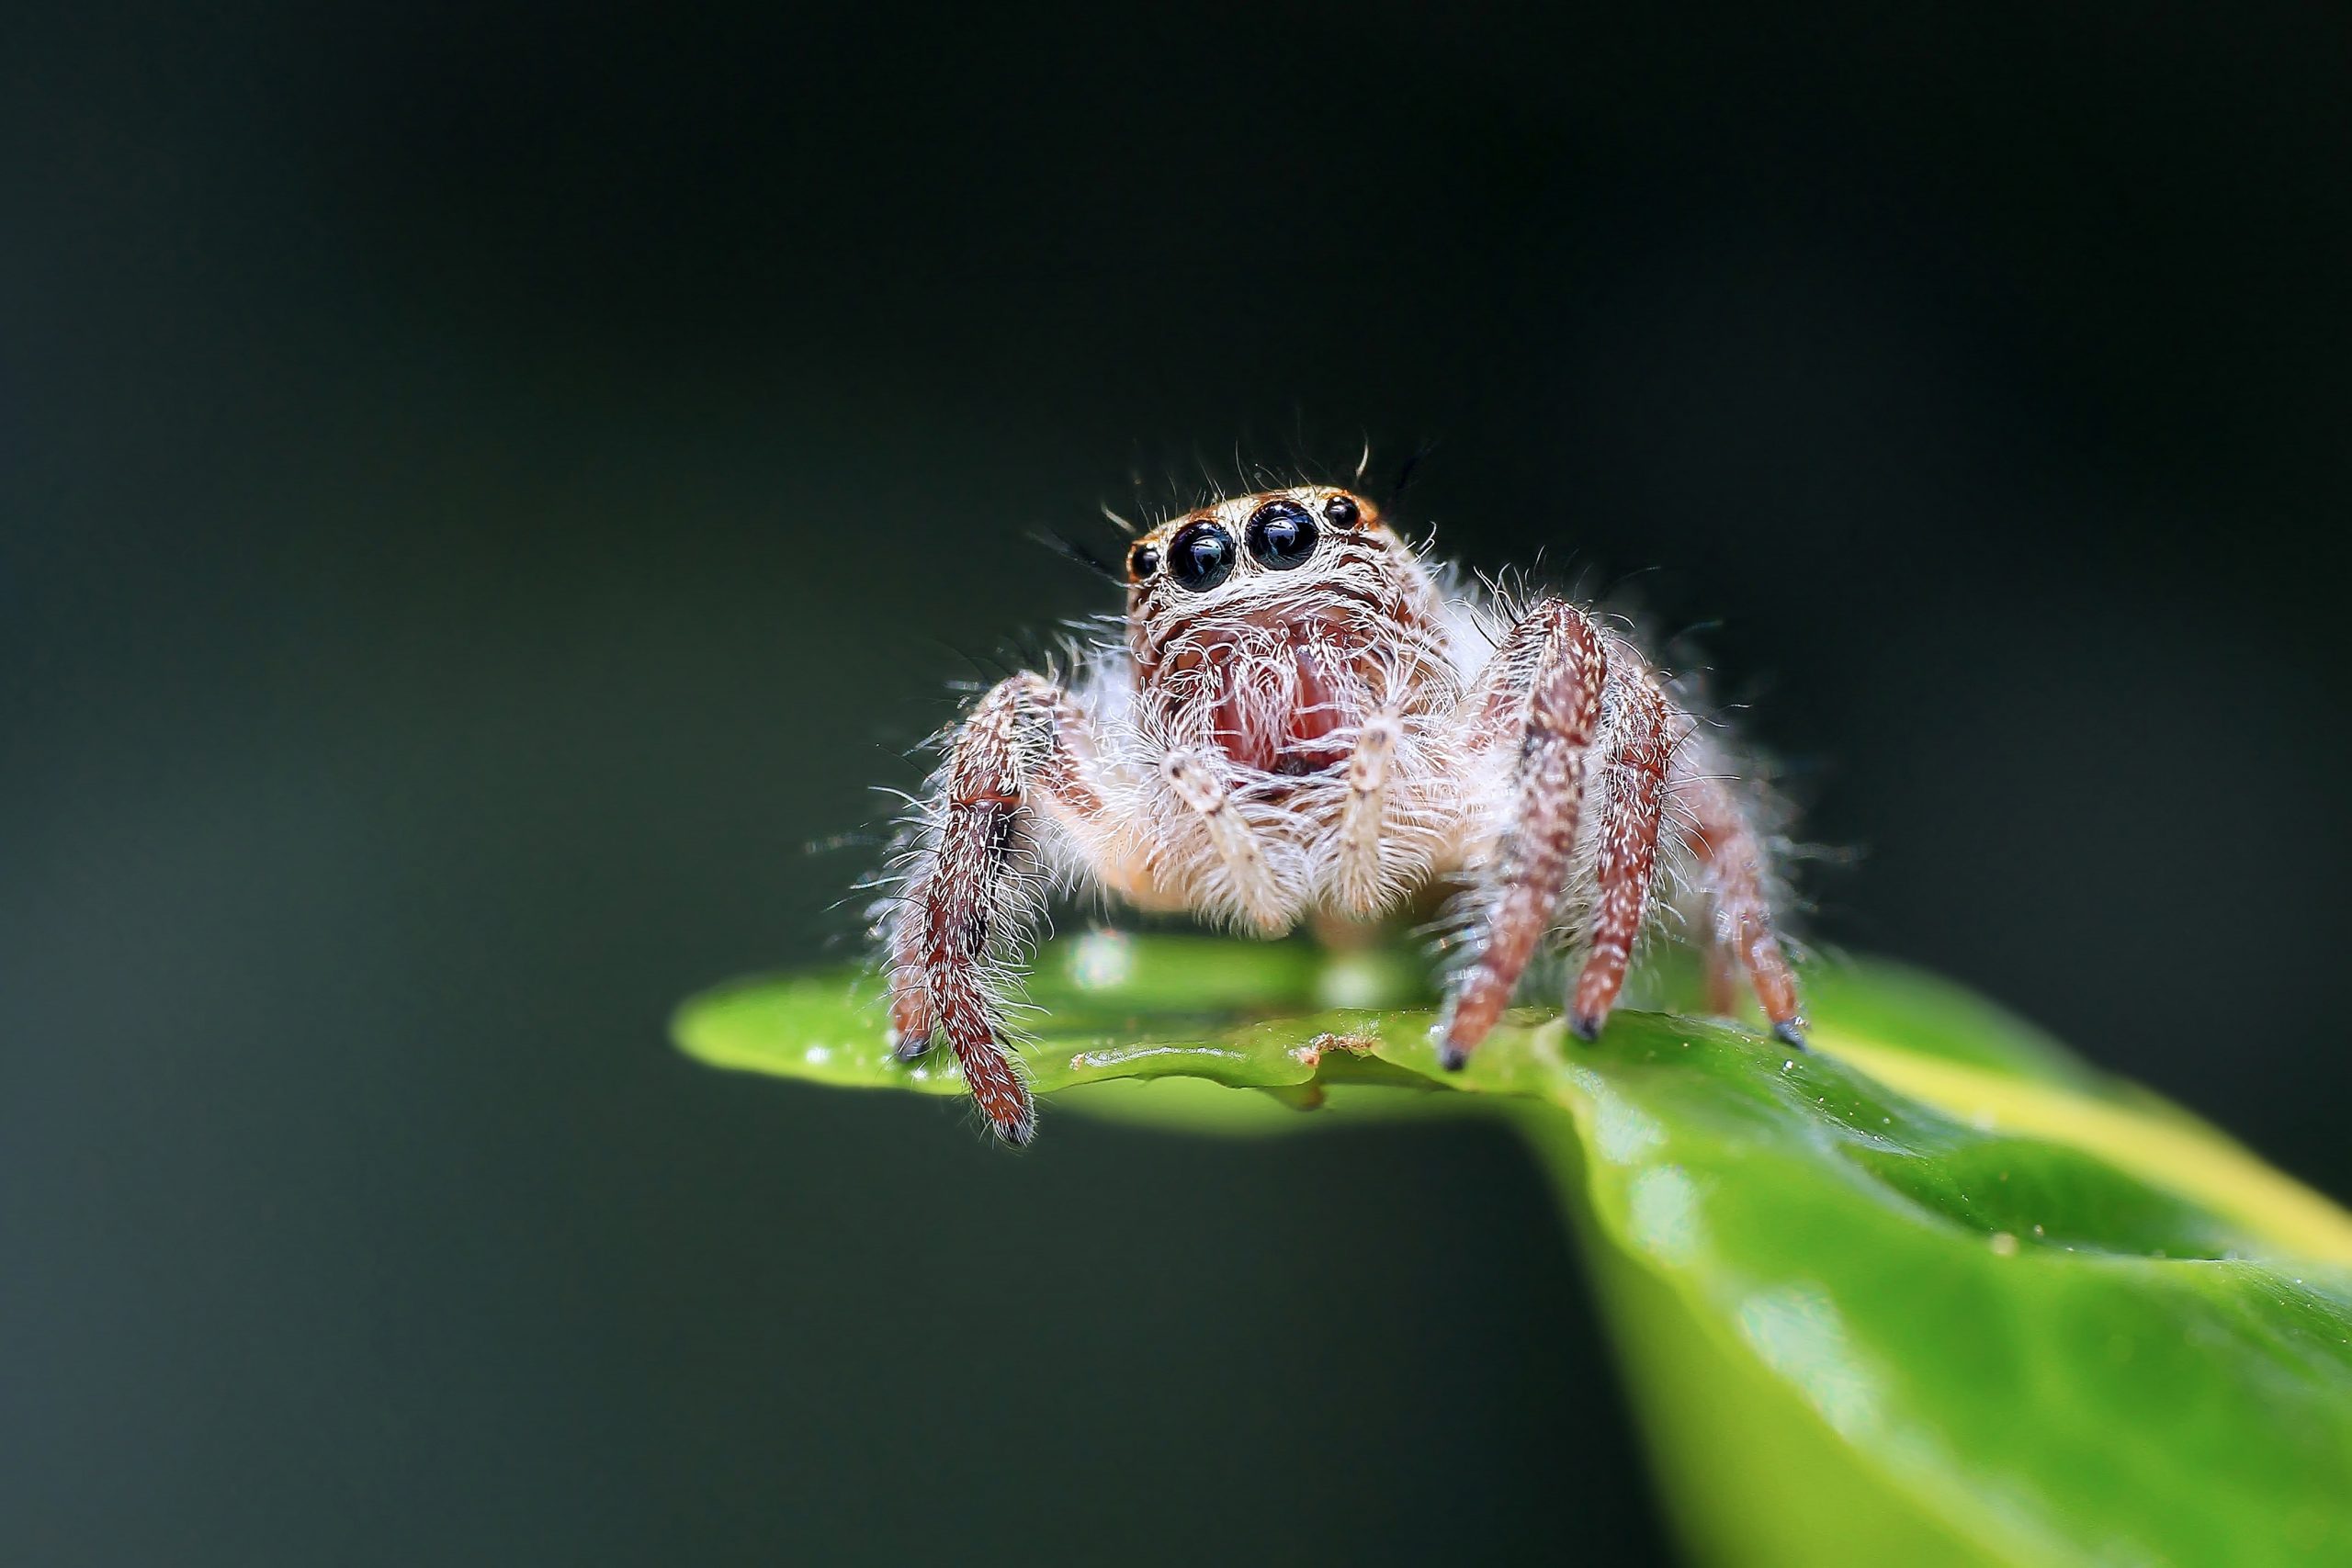 Habits and Traits of Jumping Spiders